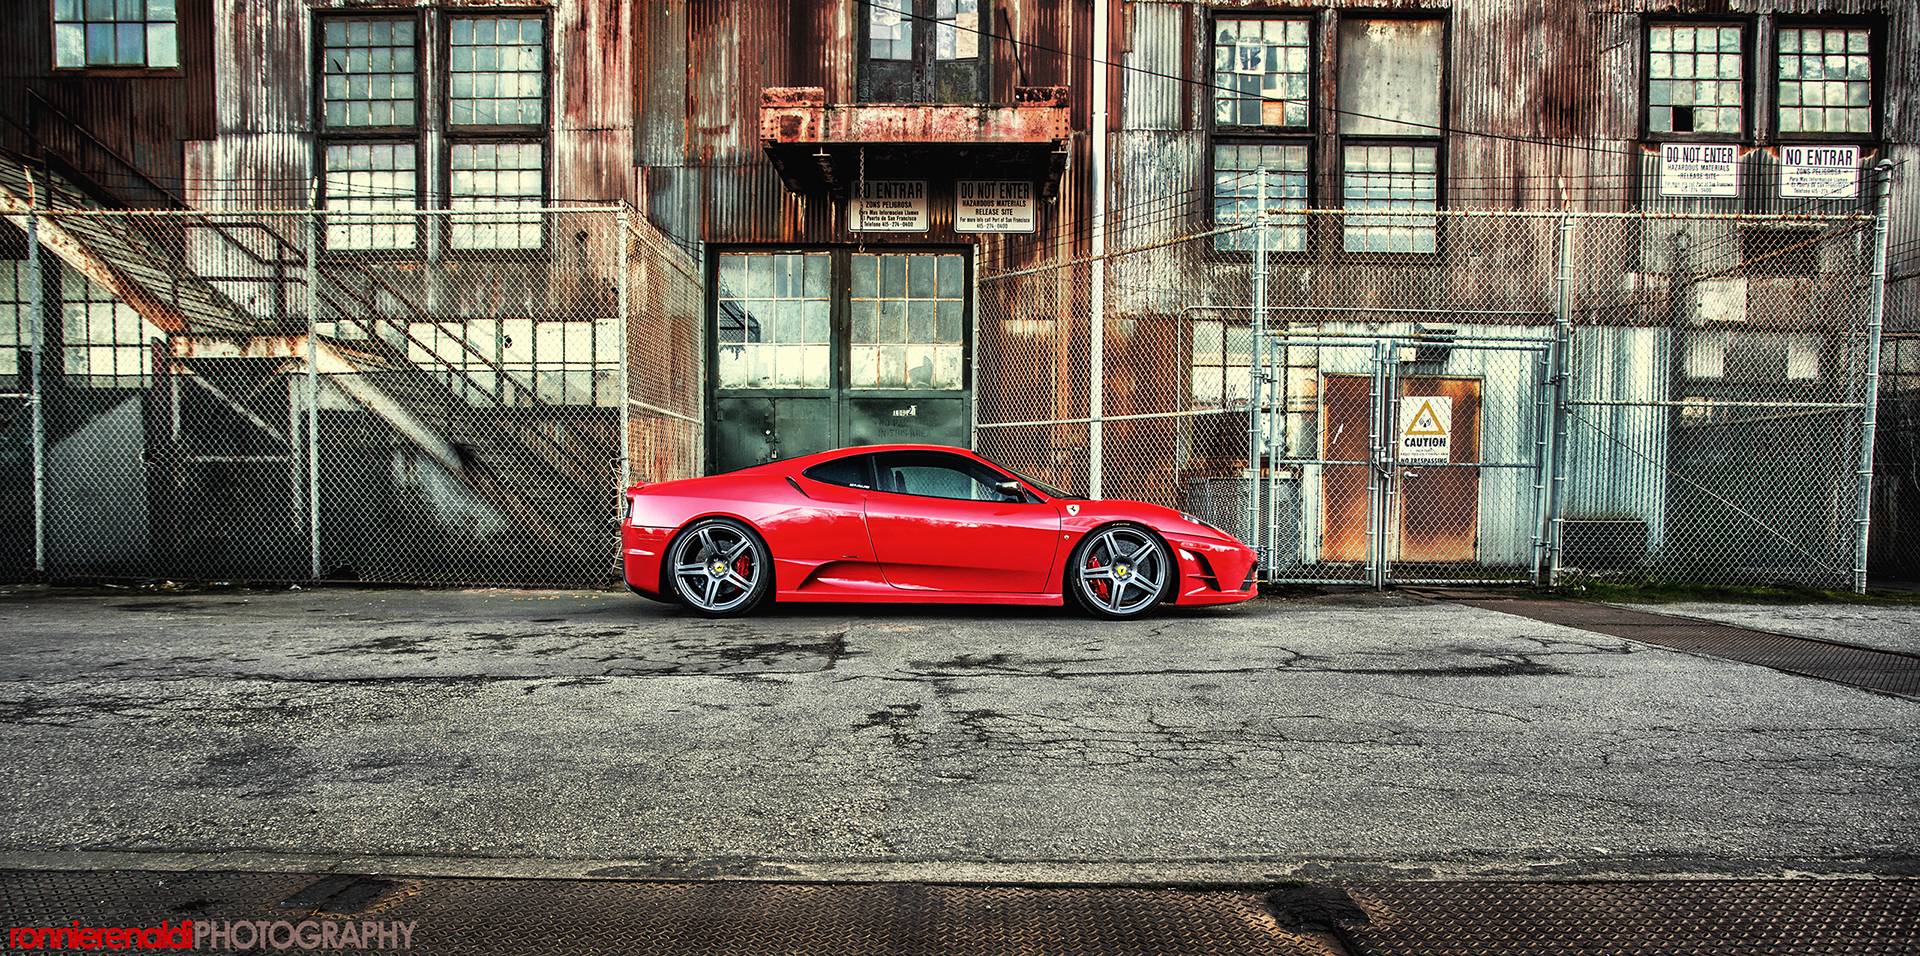 Your Ridiculously Awesome Ferrari F430 Wallpaper Is Here